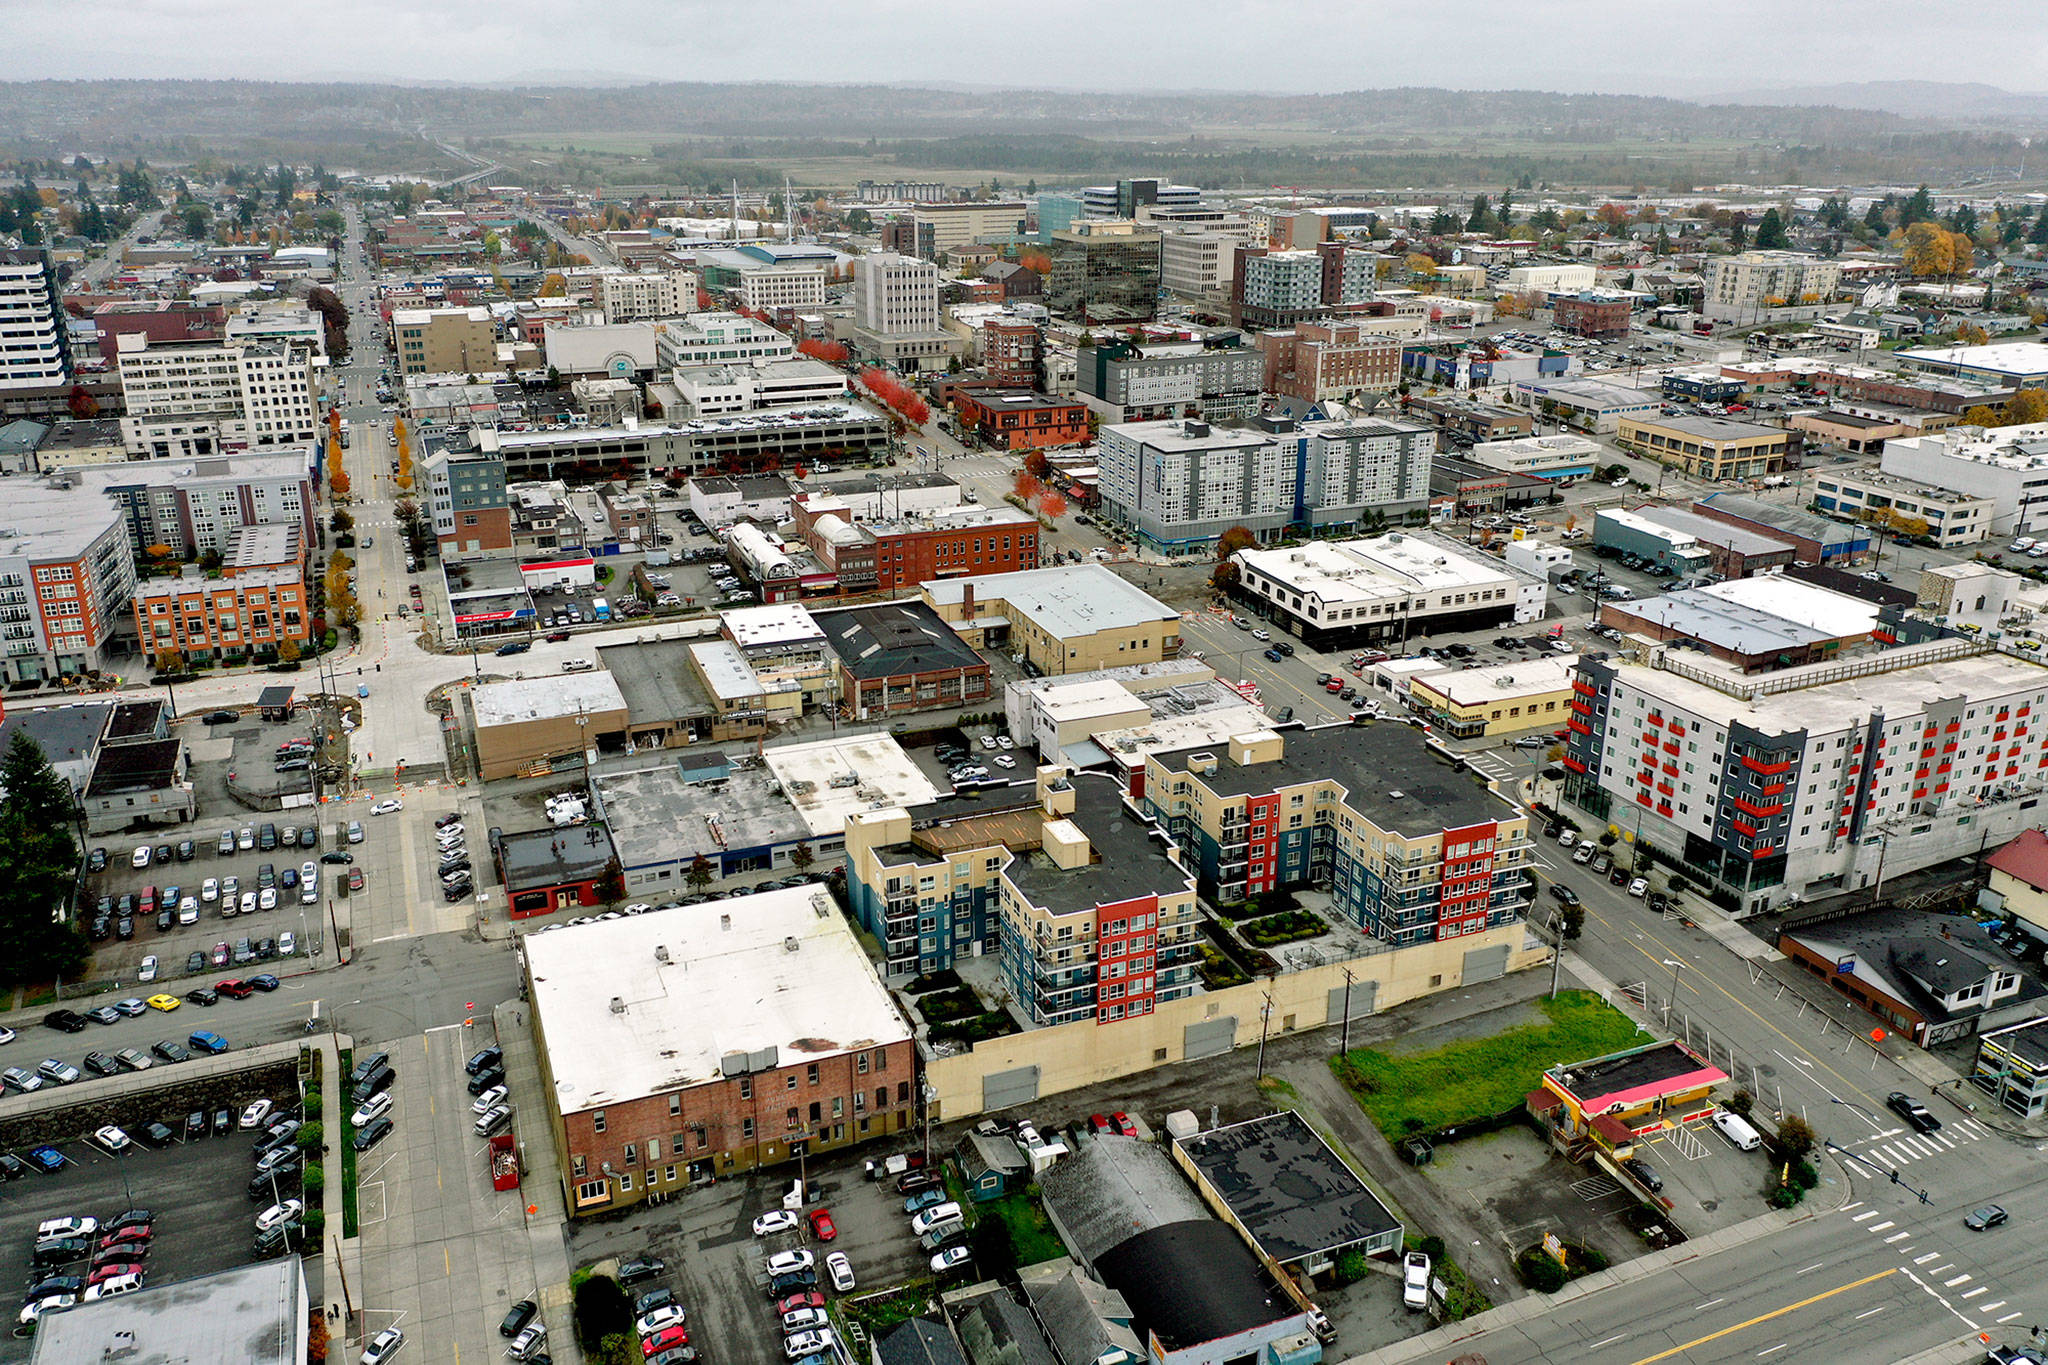 Downtown Everett. Property-tax bills in Snohomish County are rising by an average of 10.7% compared to last year. (Chuck Taylor / The Herald)